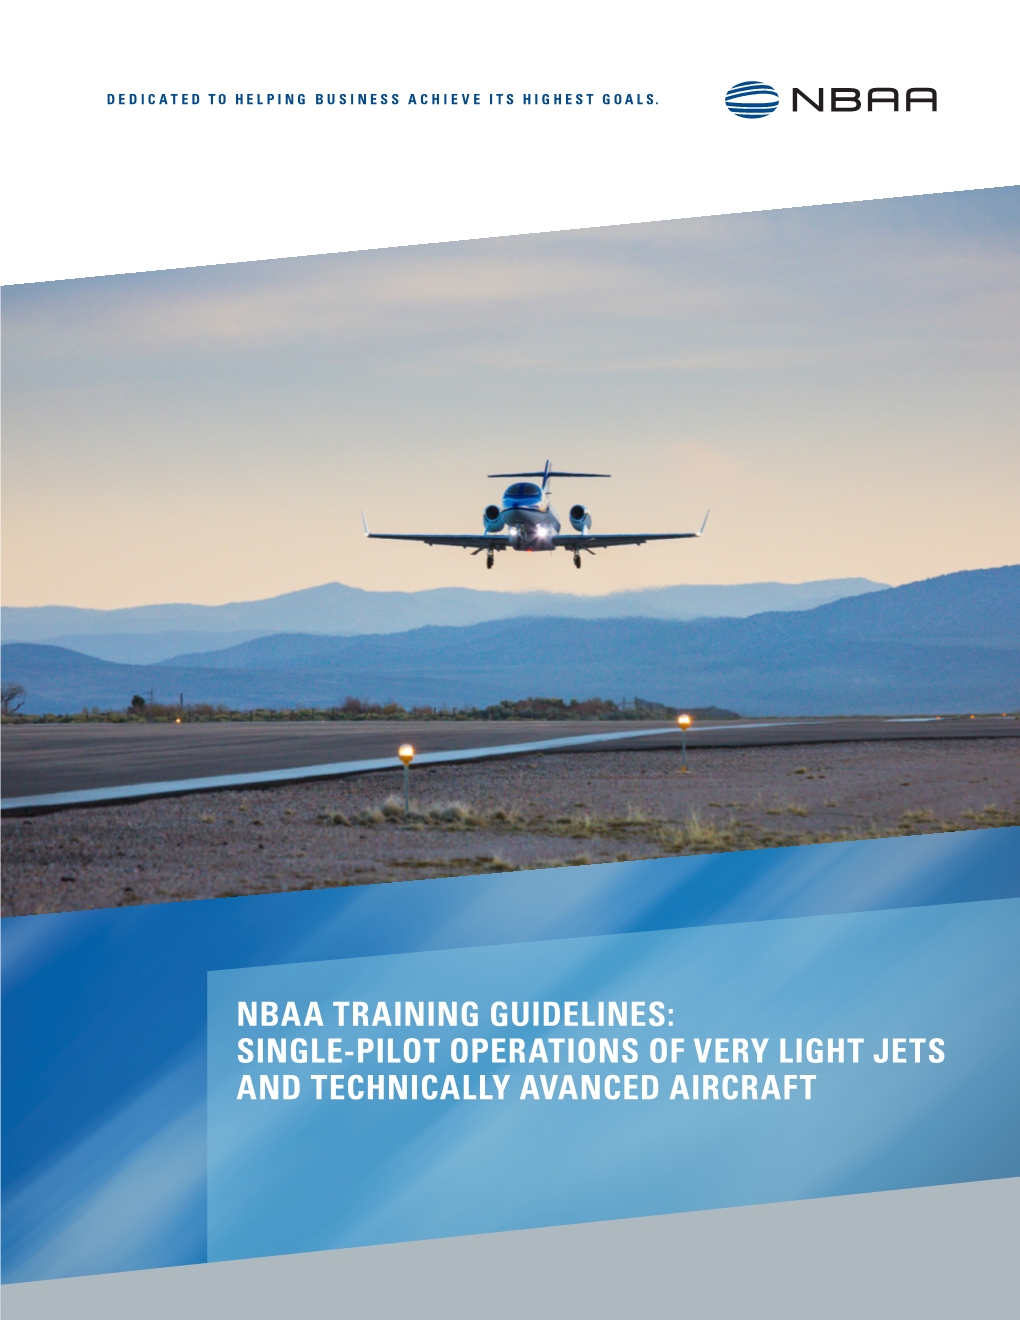 NBAA Training Guidelines for Single Pilot Operations of Very Light Jets